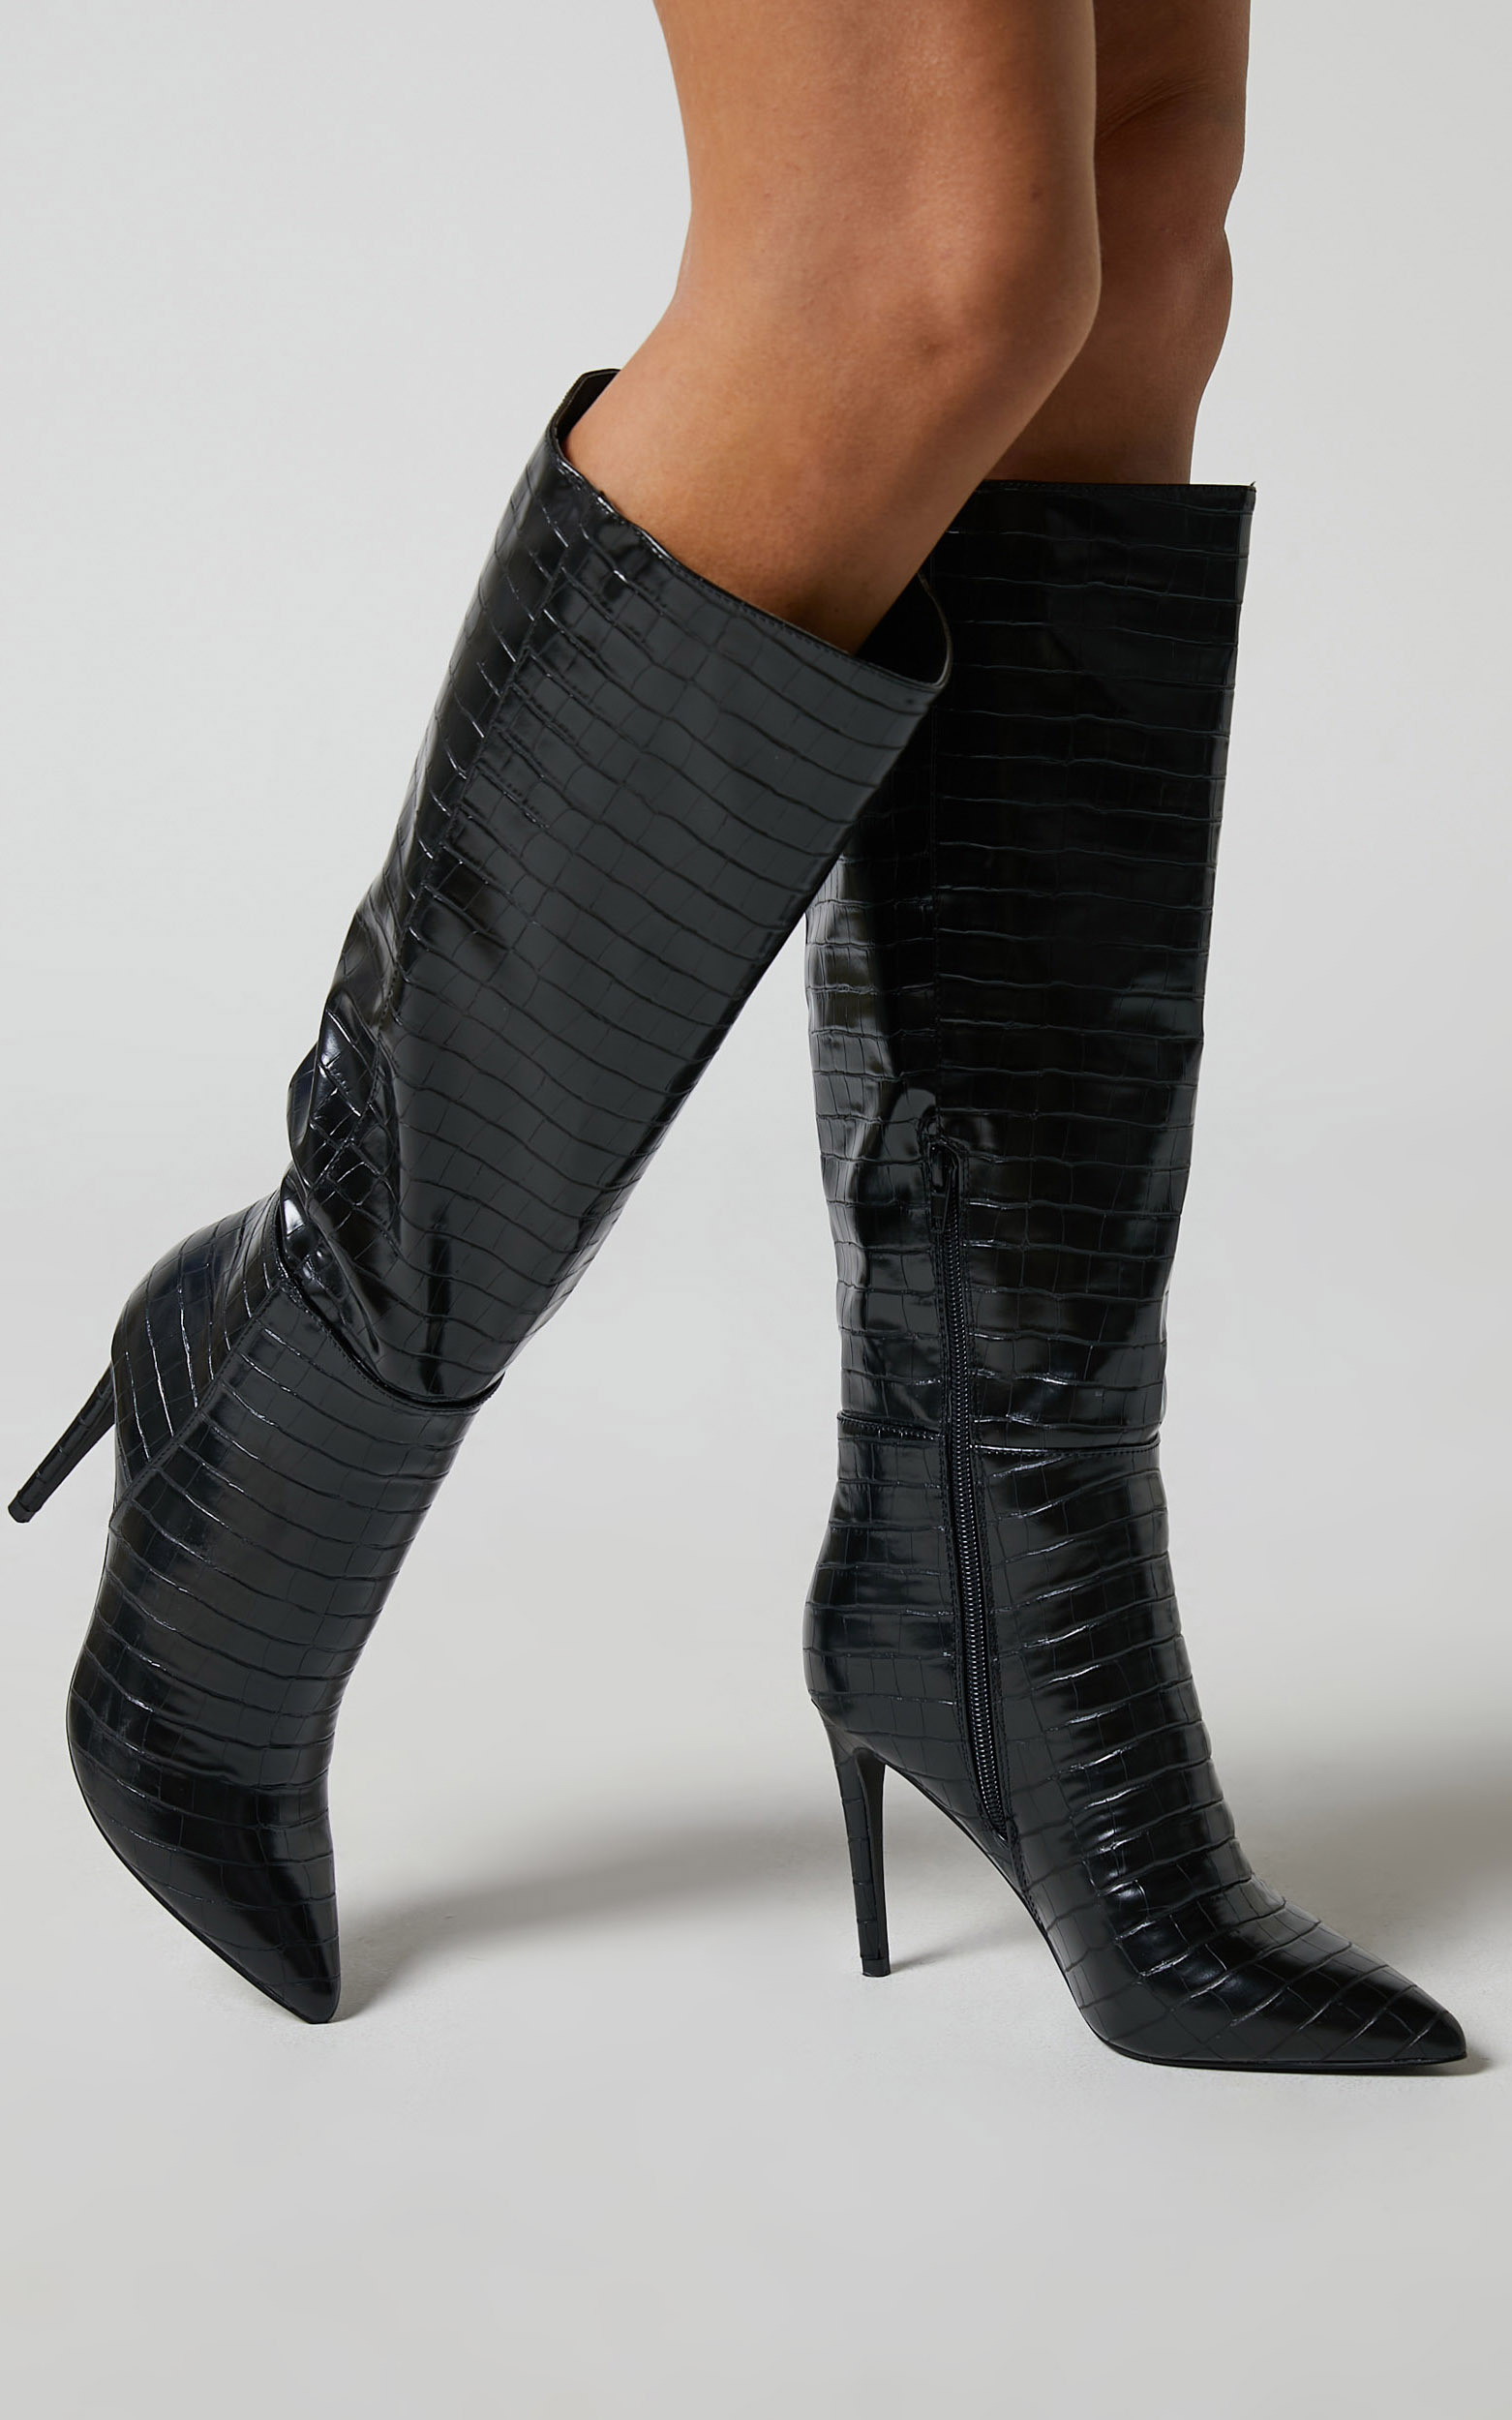 Therapy - Icon Boots in Black Croc - 06, BLK1, hi-res image number null